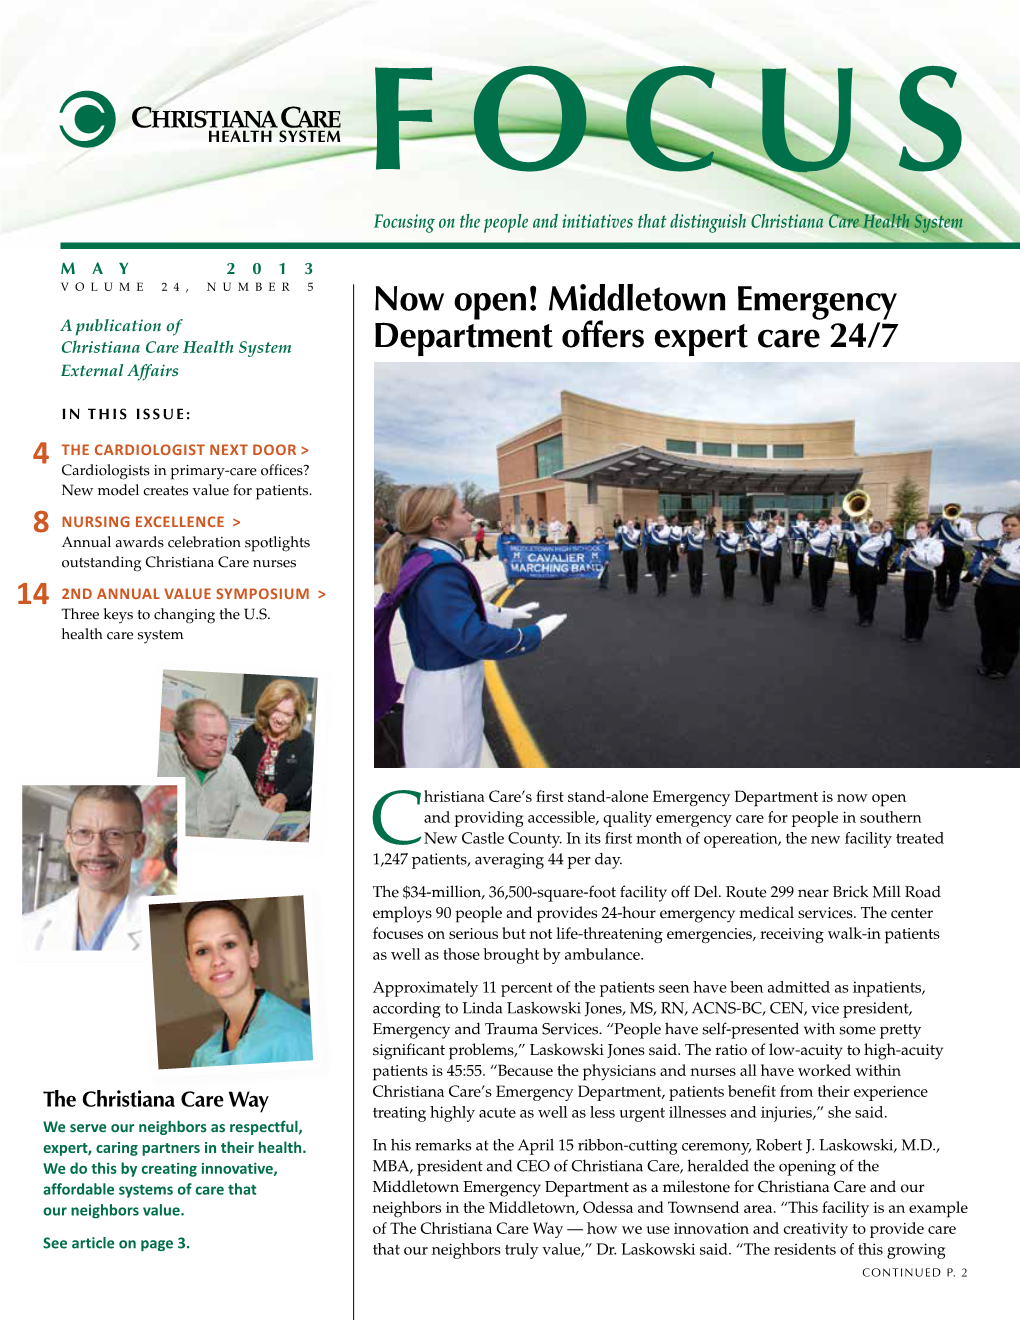 MAY 2013 Volume 24, Number 5 Now Open! Middletown Emergency a Publication of Christiana Care Health System Department Offers Expert Care 24/7 External Affairs